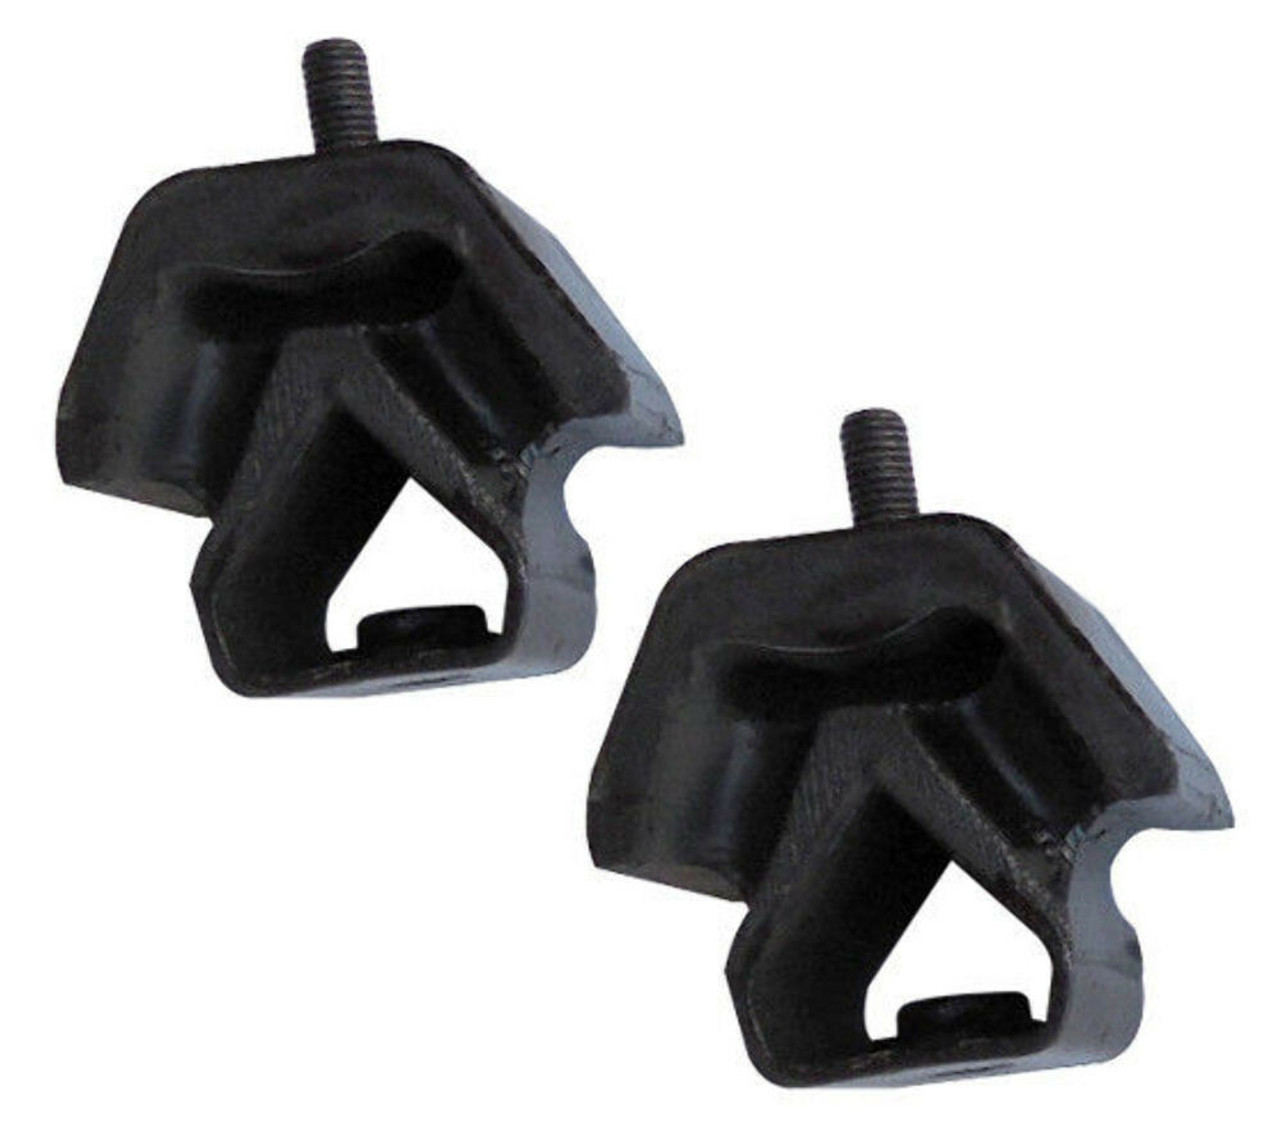 REAR ENGINE SUPPORT BAR MOUNTS, 2 PC,  1968-71 VW TYPE 2 BUS,  211-199-231A